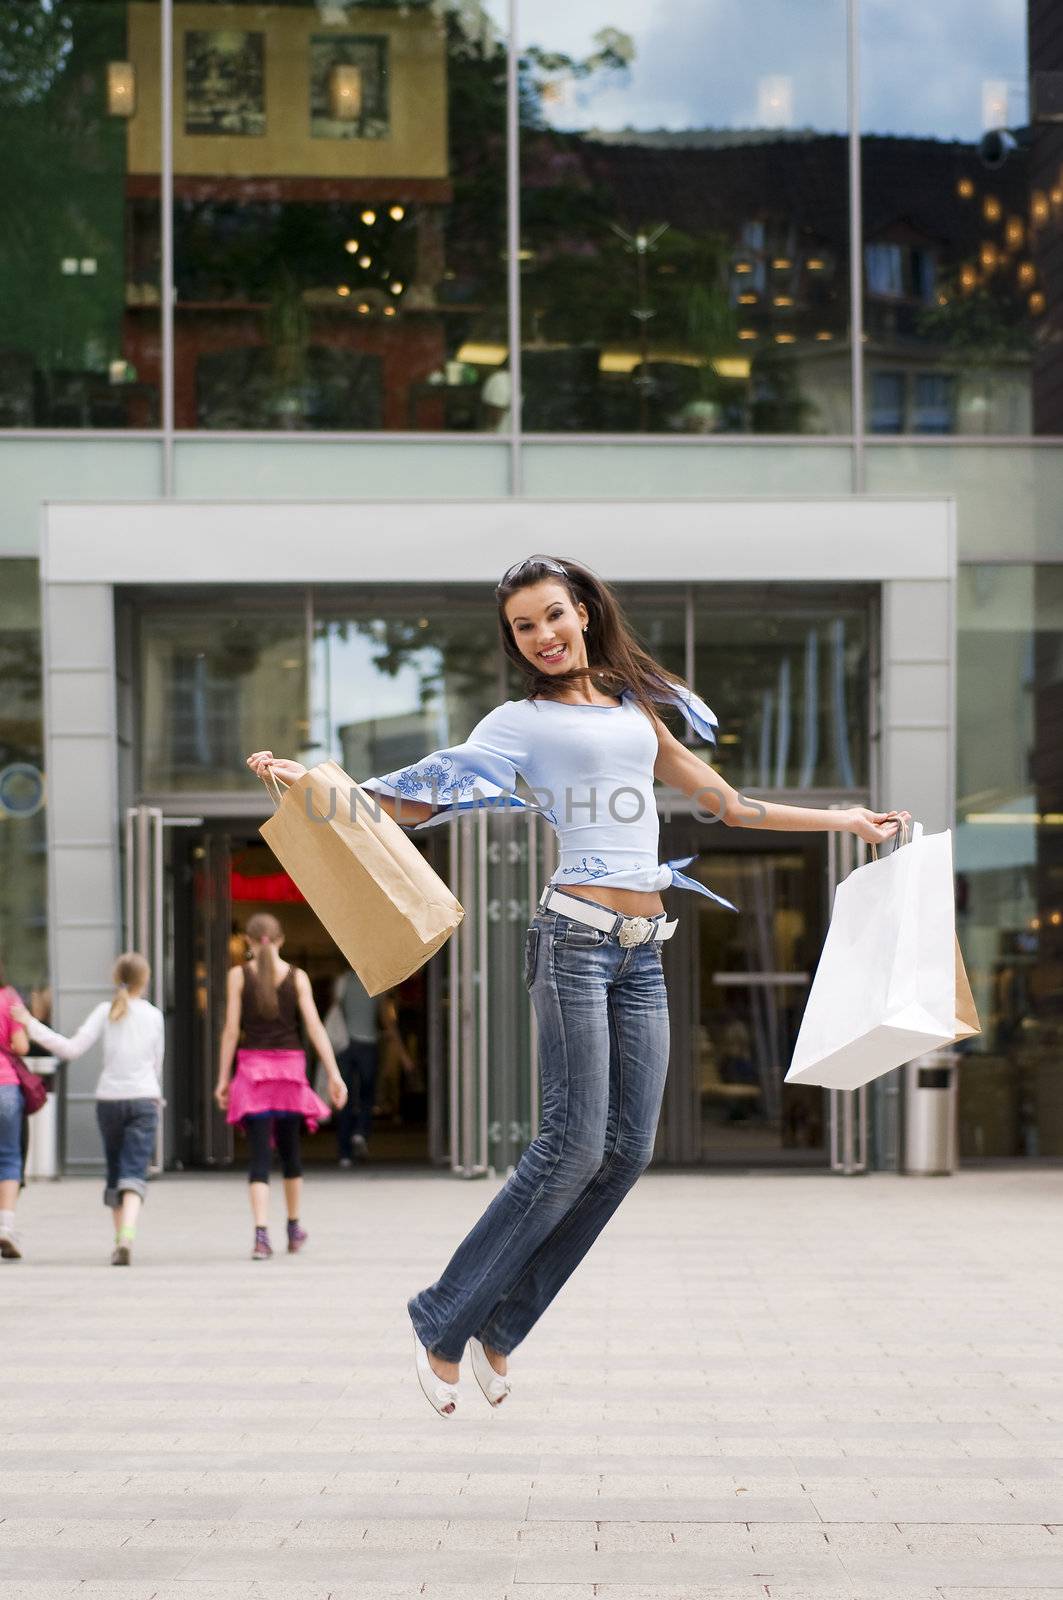 beautiful brunette jumping with her shopping bags after a hard day in commercial center